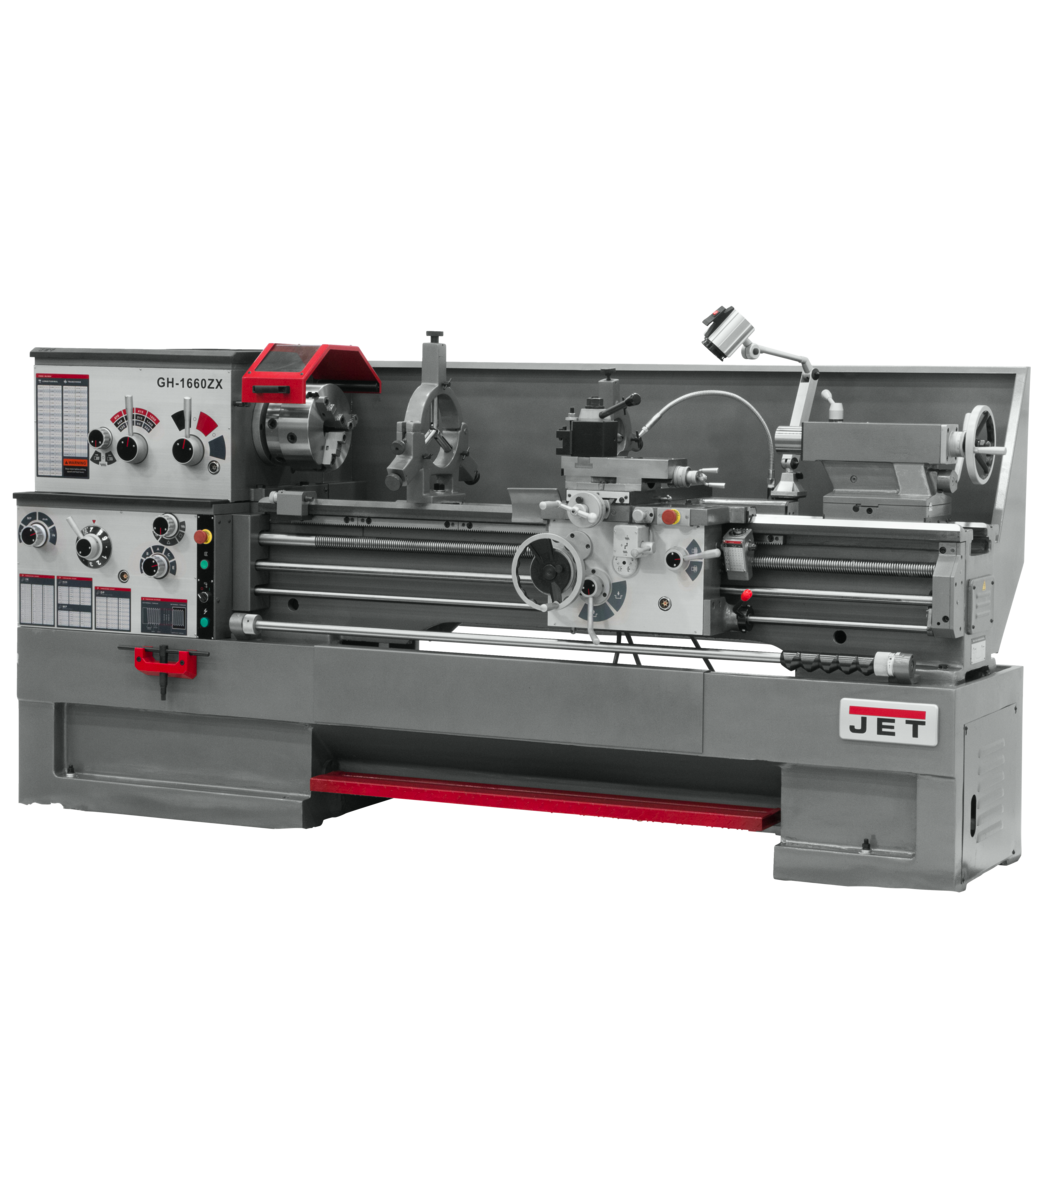 321504, GH-1860ZX , 18" Swing, 60" Between Centers, GH-1860ZX With ACU-RITE 203 DRO With Taper Attachment installed, Jet, Metalworking, Turning, Lathes